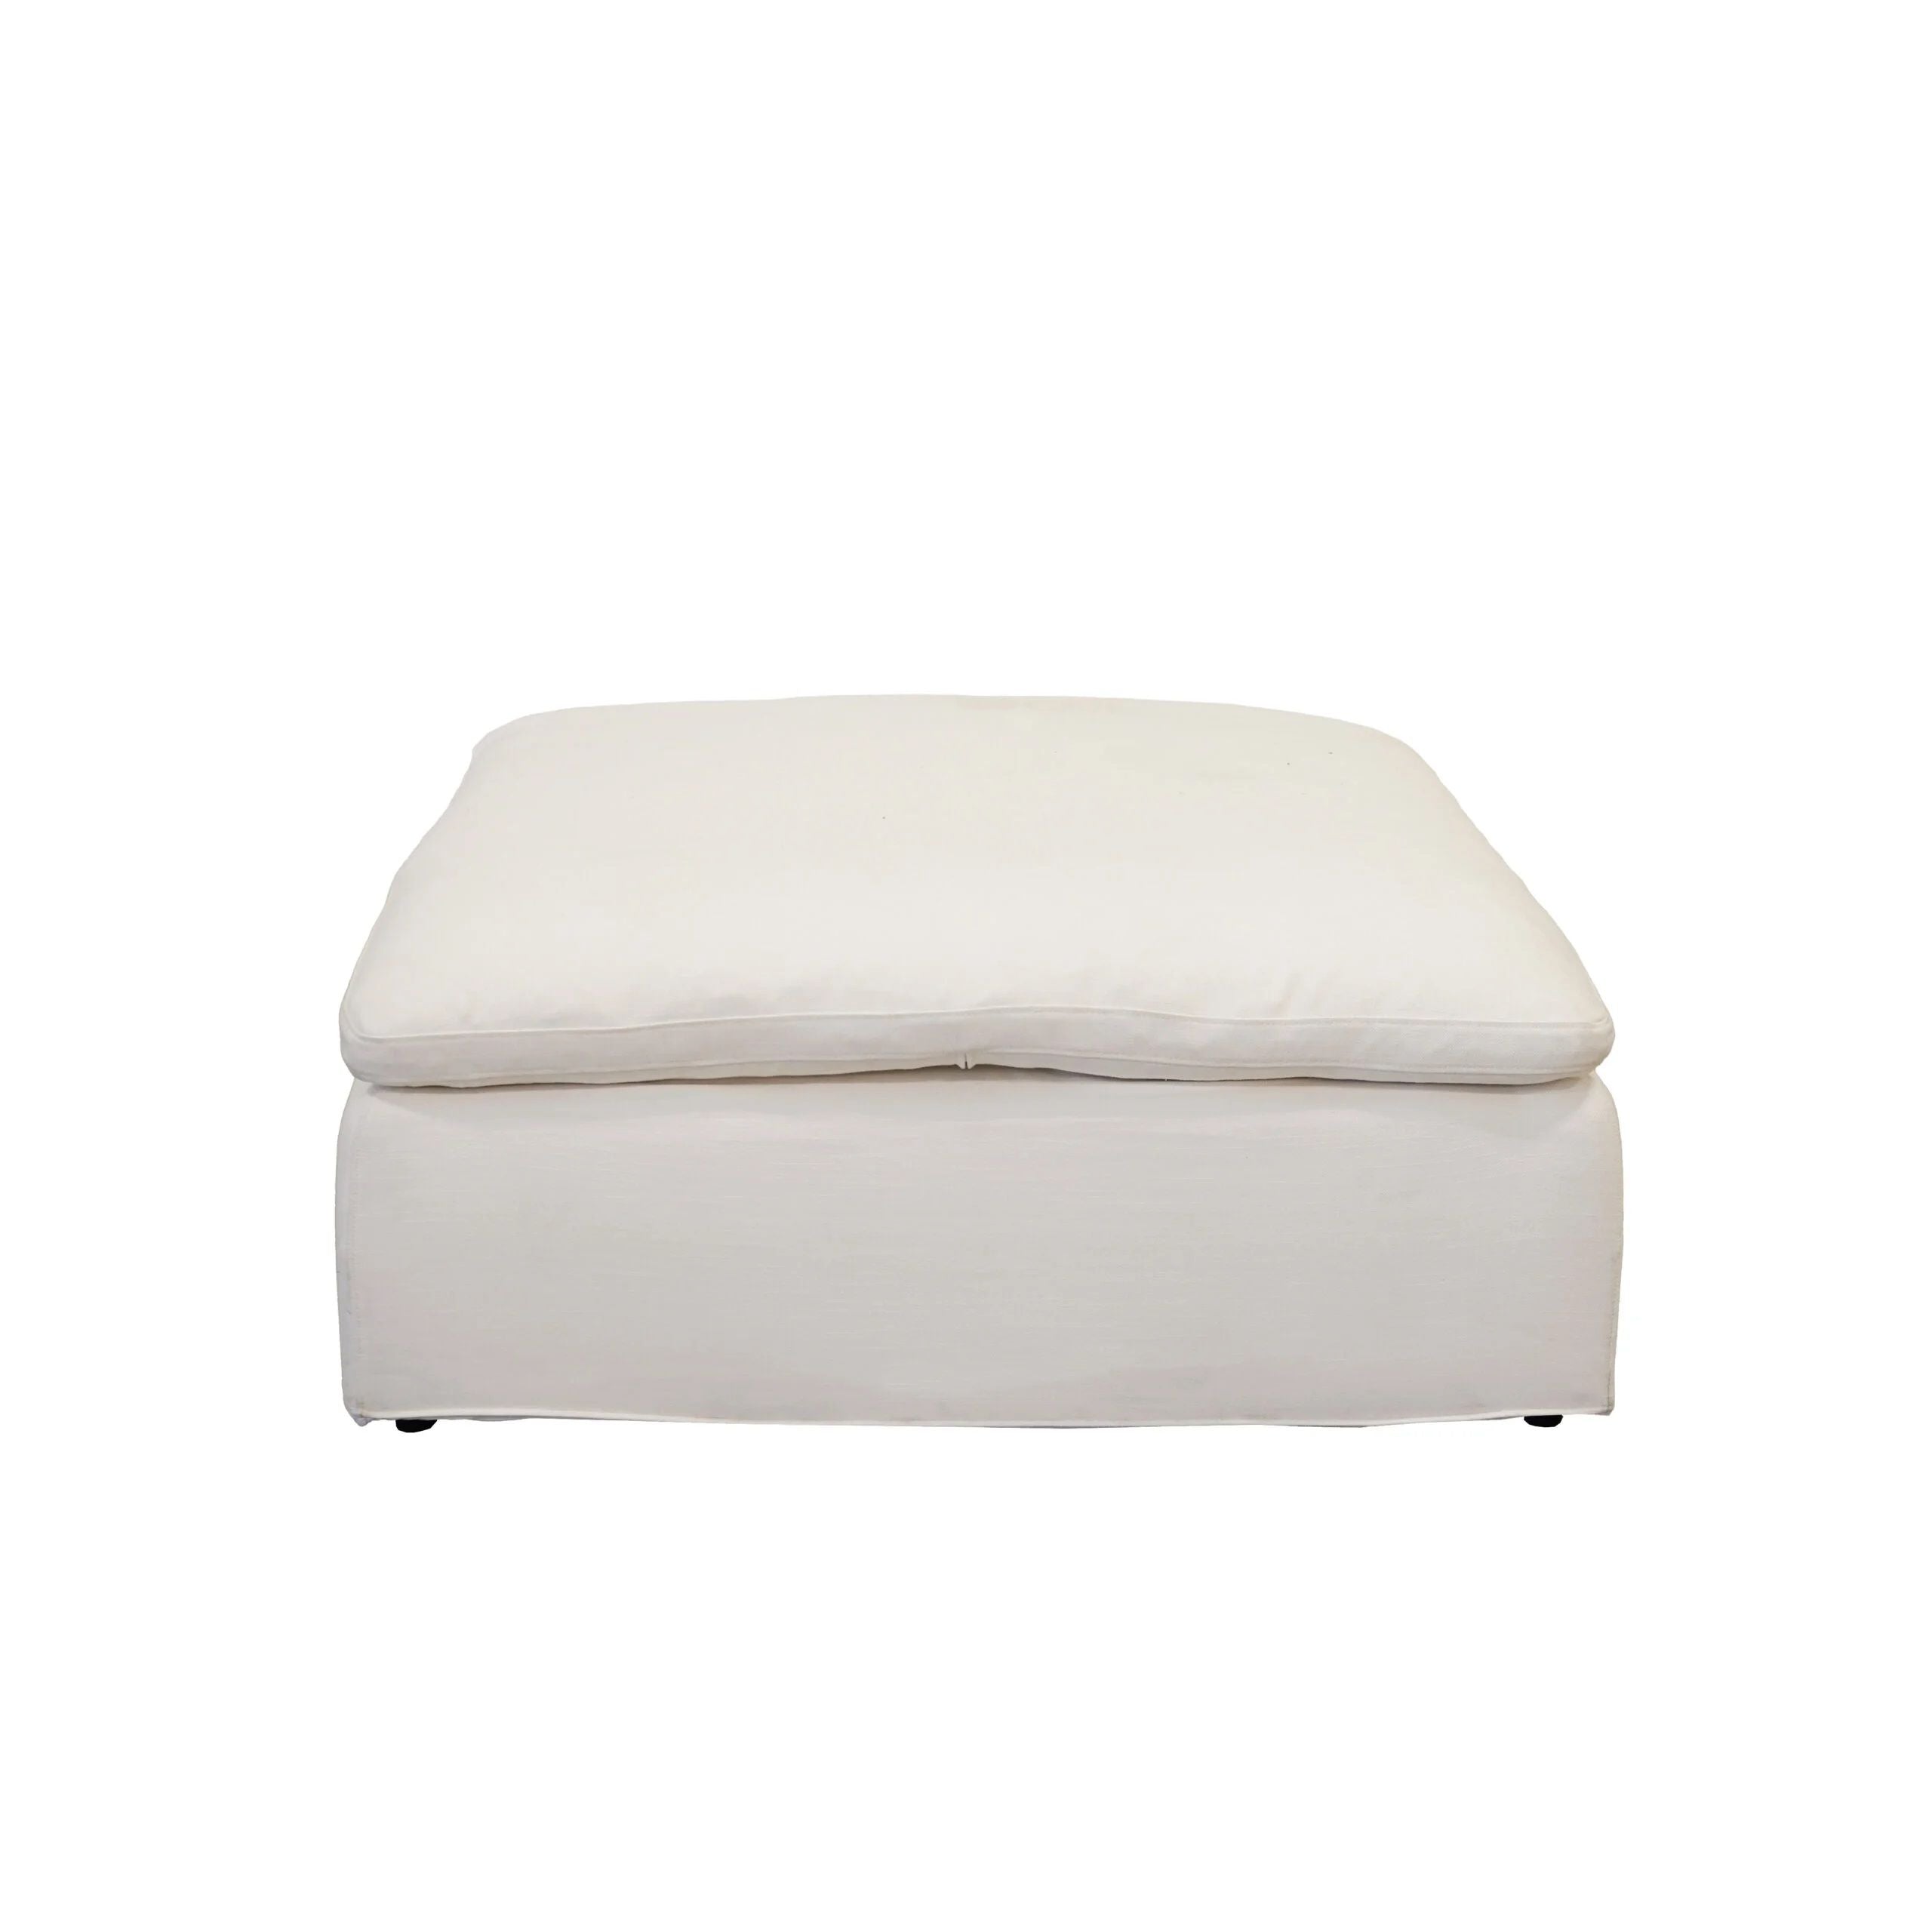 Modern 17" Luxe Size Ottoman, Premium Fabric Upholstered Living Room Cube Shape Ottoman With Plush Seat Cushion, White